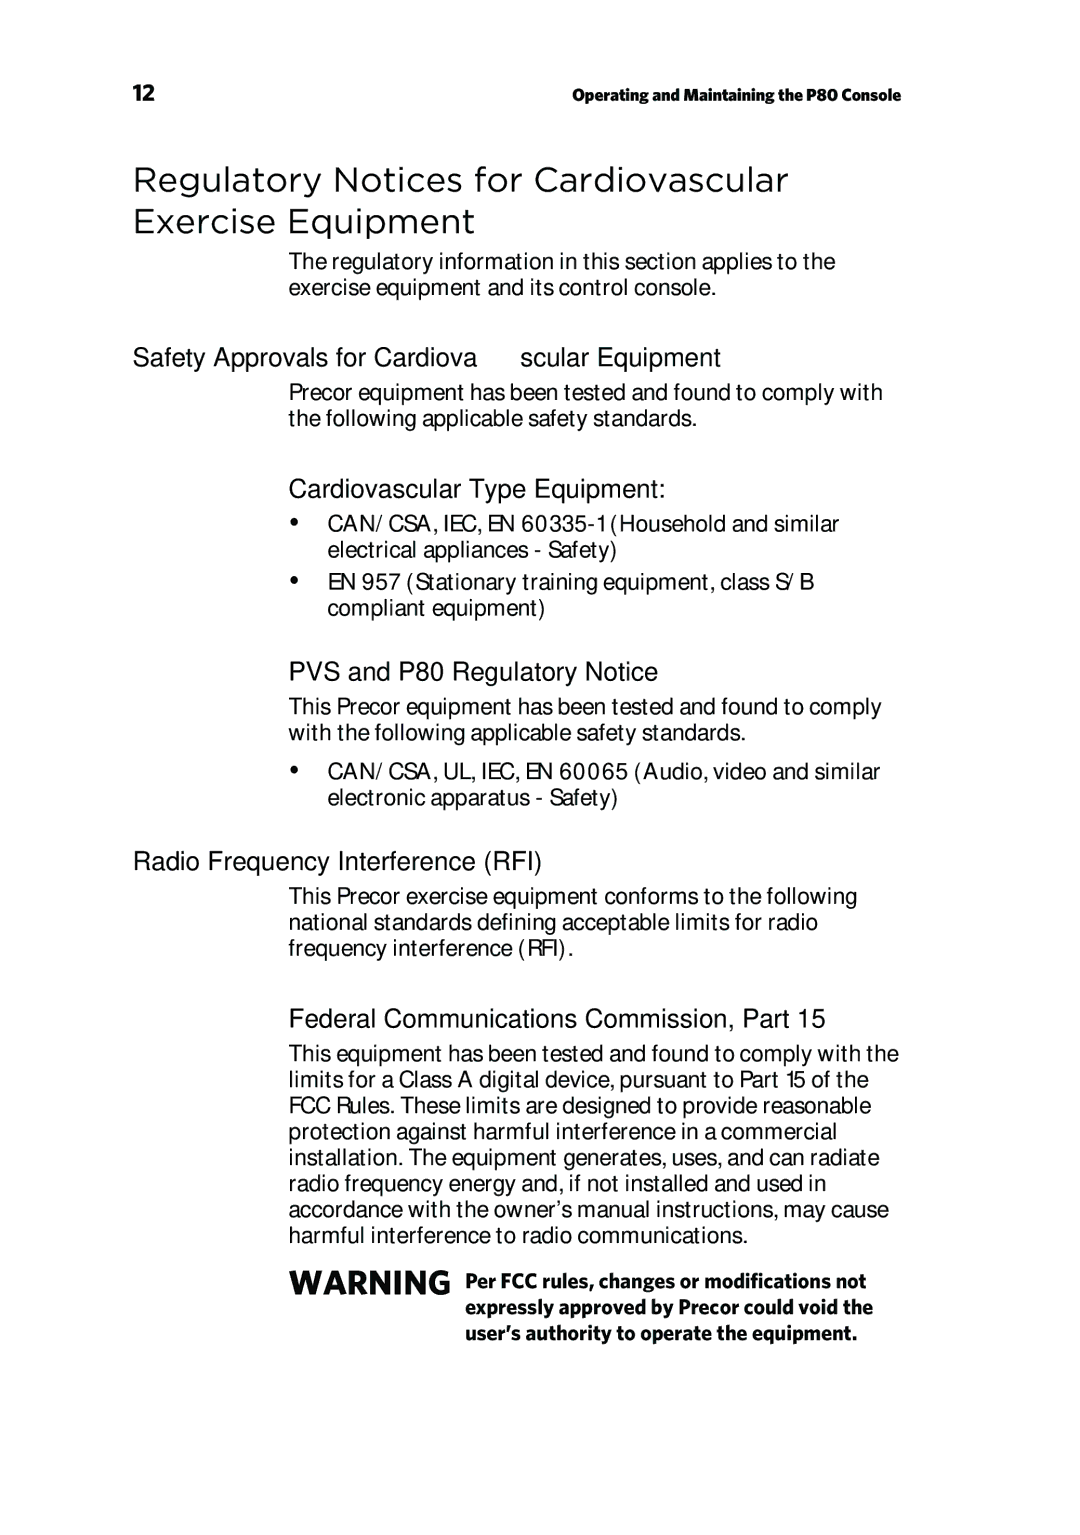 Precor P80 manual Regulatory Notices for Cardiovascular Exercise Equipment, Safety Approvals for Cardiovascular Equipment 